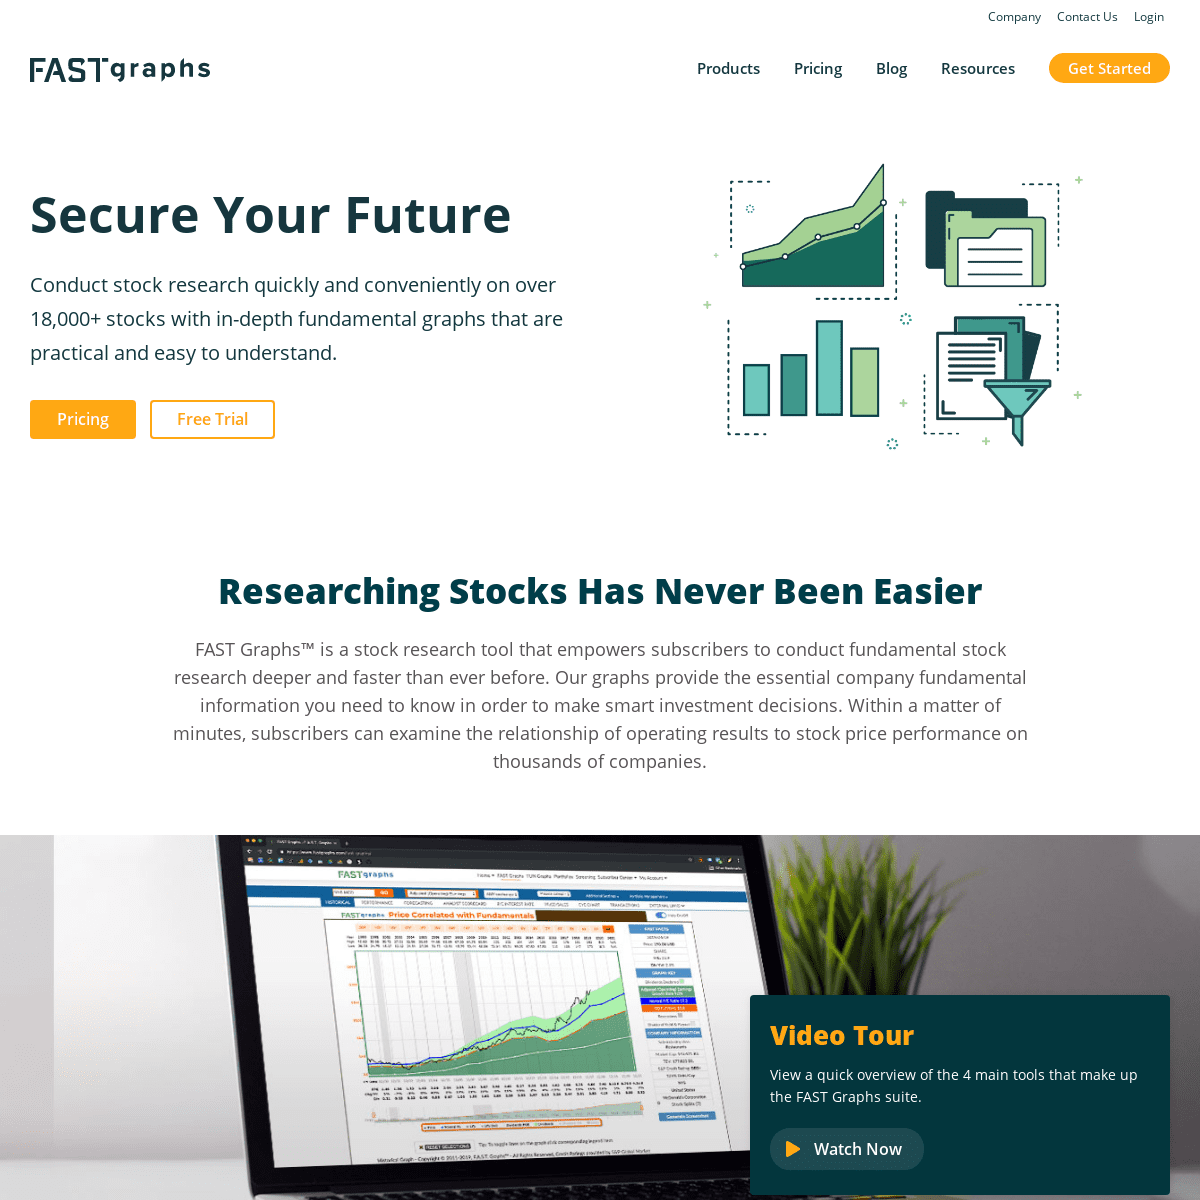 Secure Your Future - F.A.S.T. Graphs